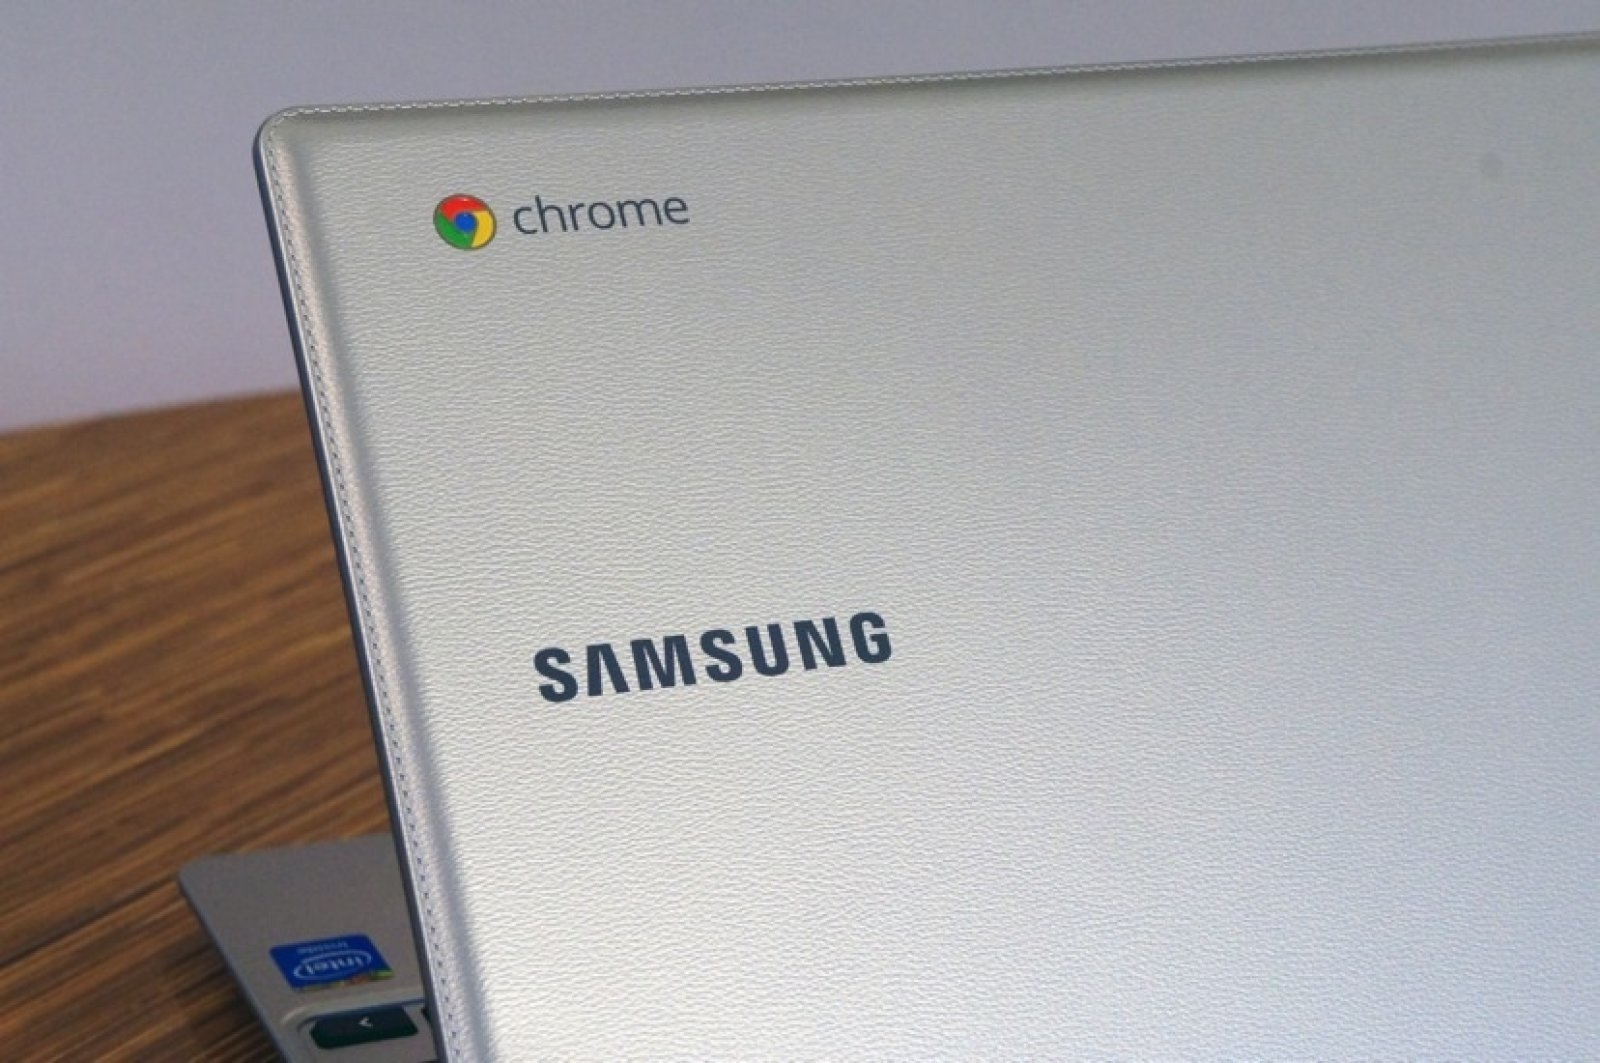 Chrome's pull-to-refresh starts making its way to Chromebooks | DeviceDaily.com